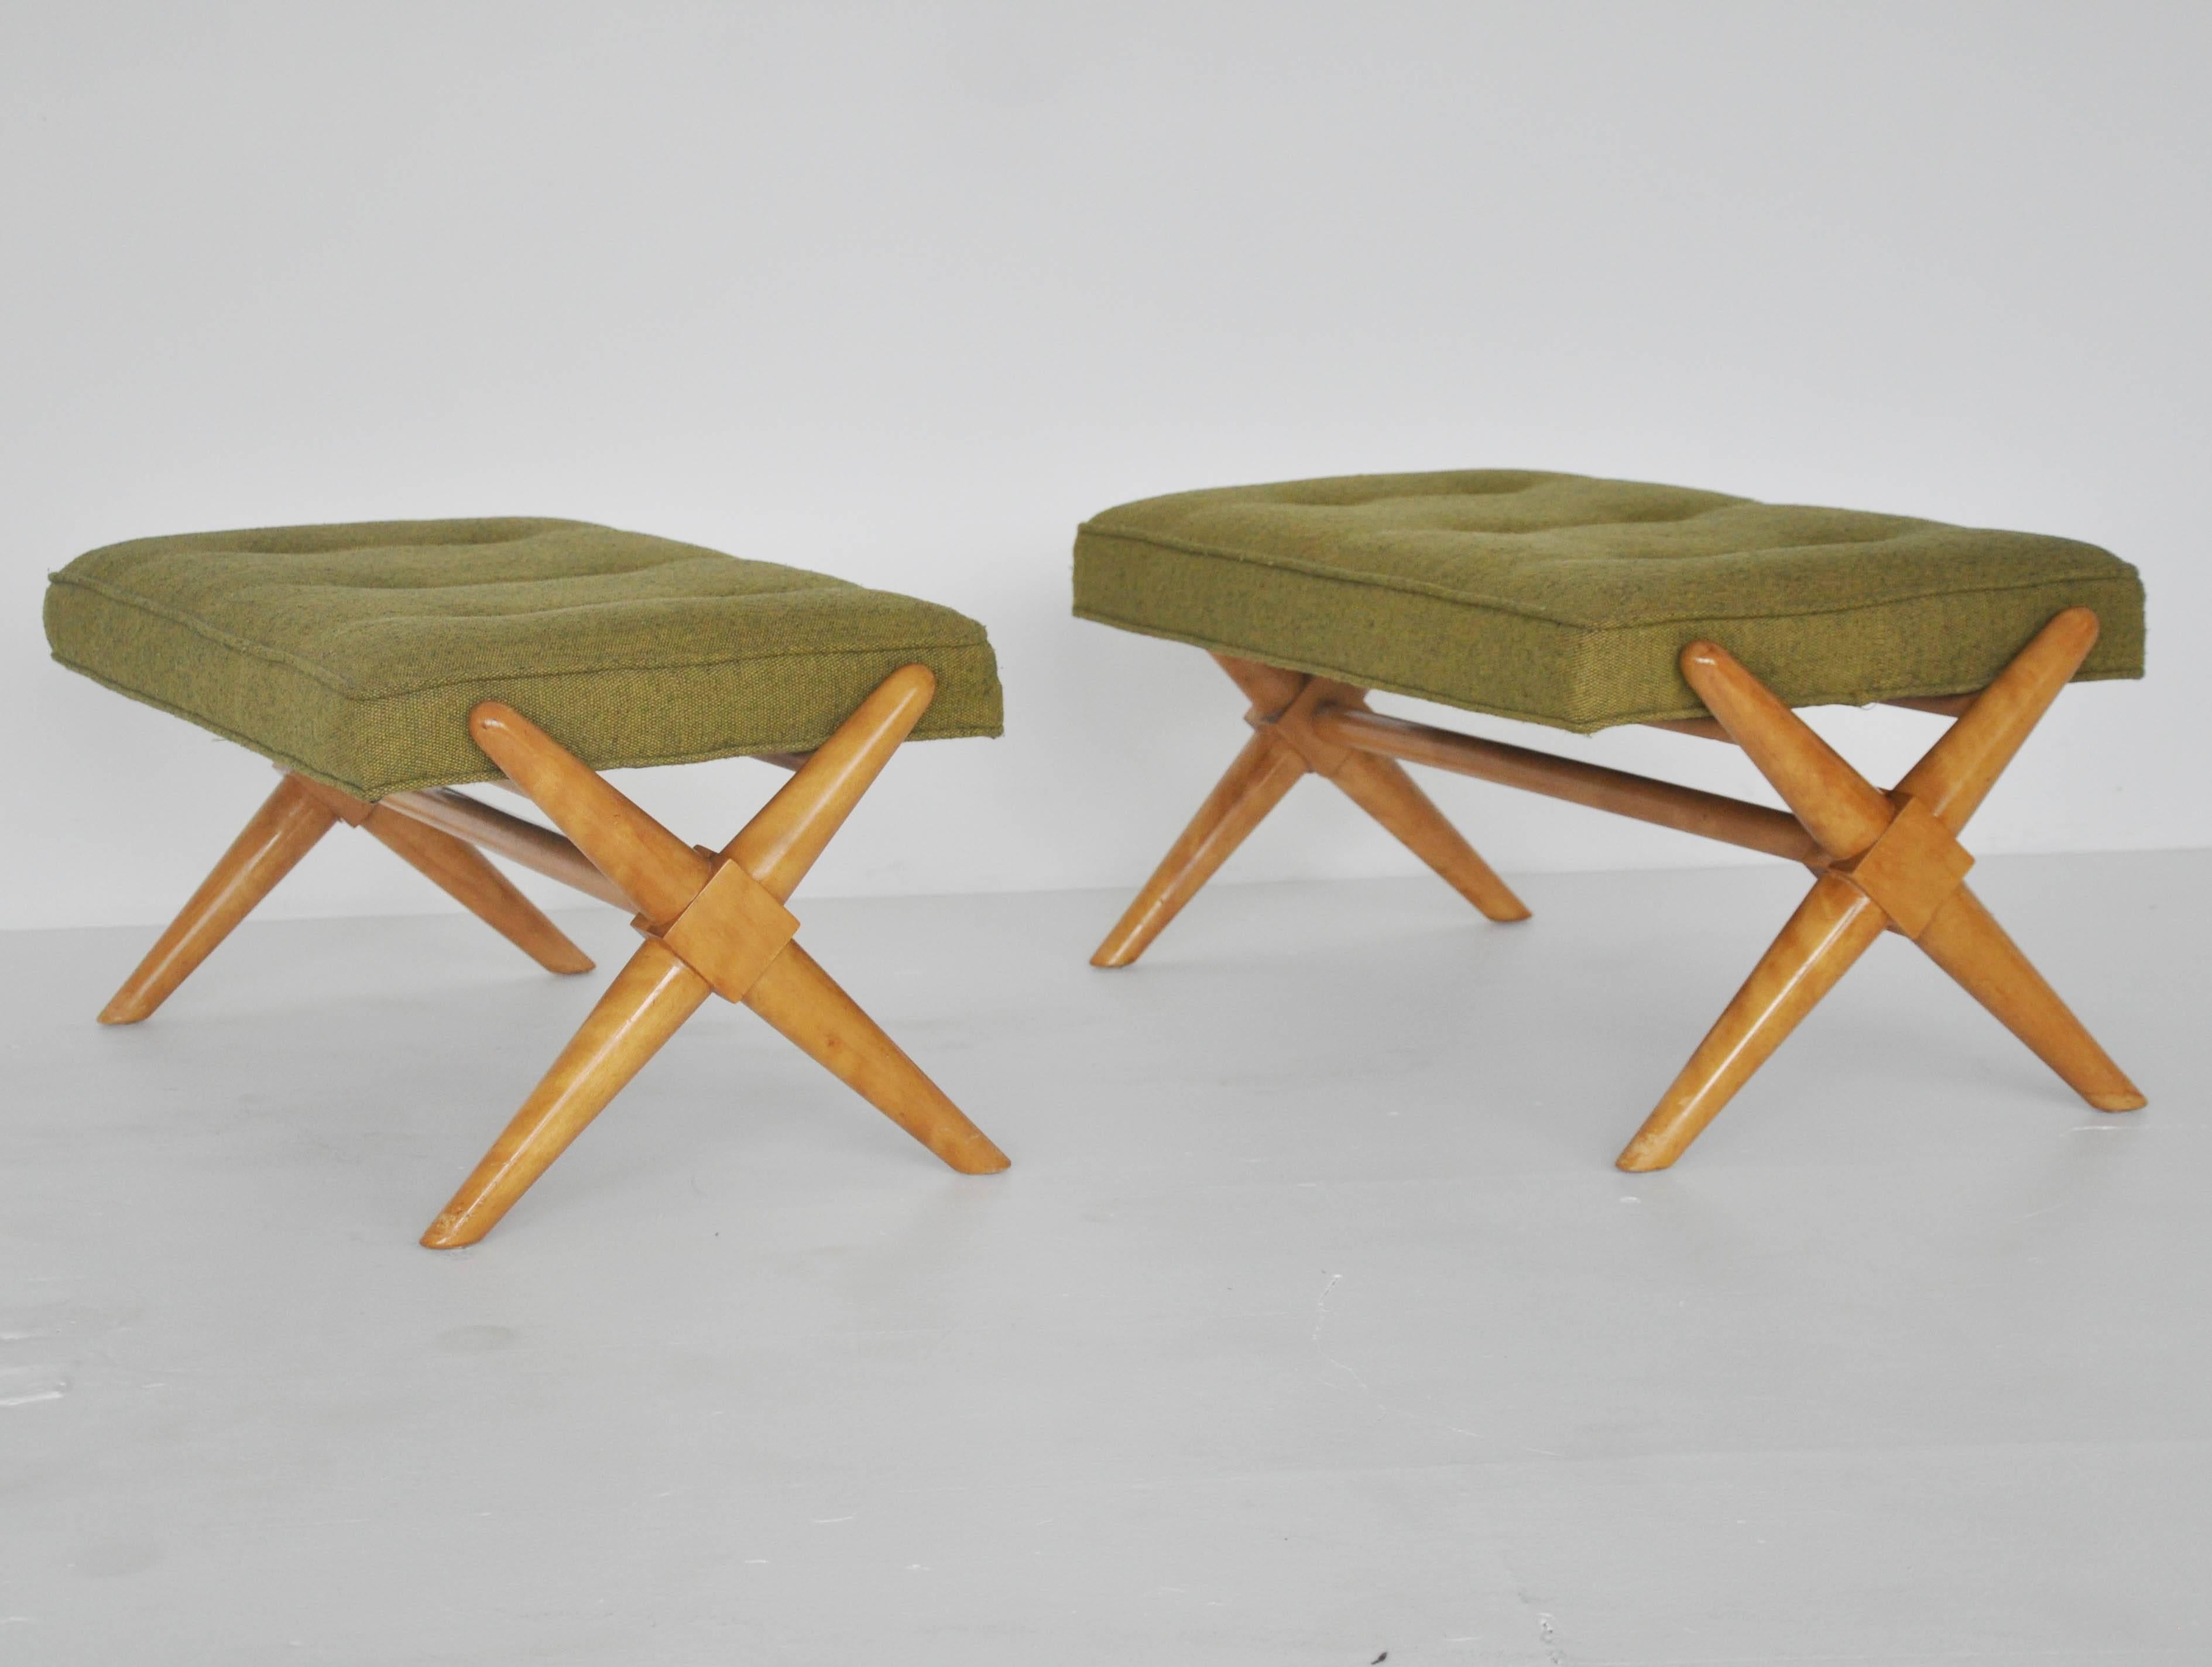 Pair of X-base benches. Model number 1683, by T.H. Robsjohn-Gibbings for Widdicomb, American, circa 1950.